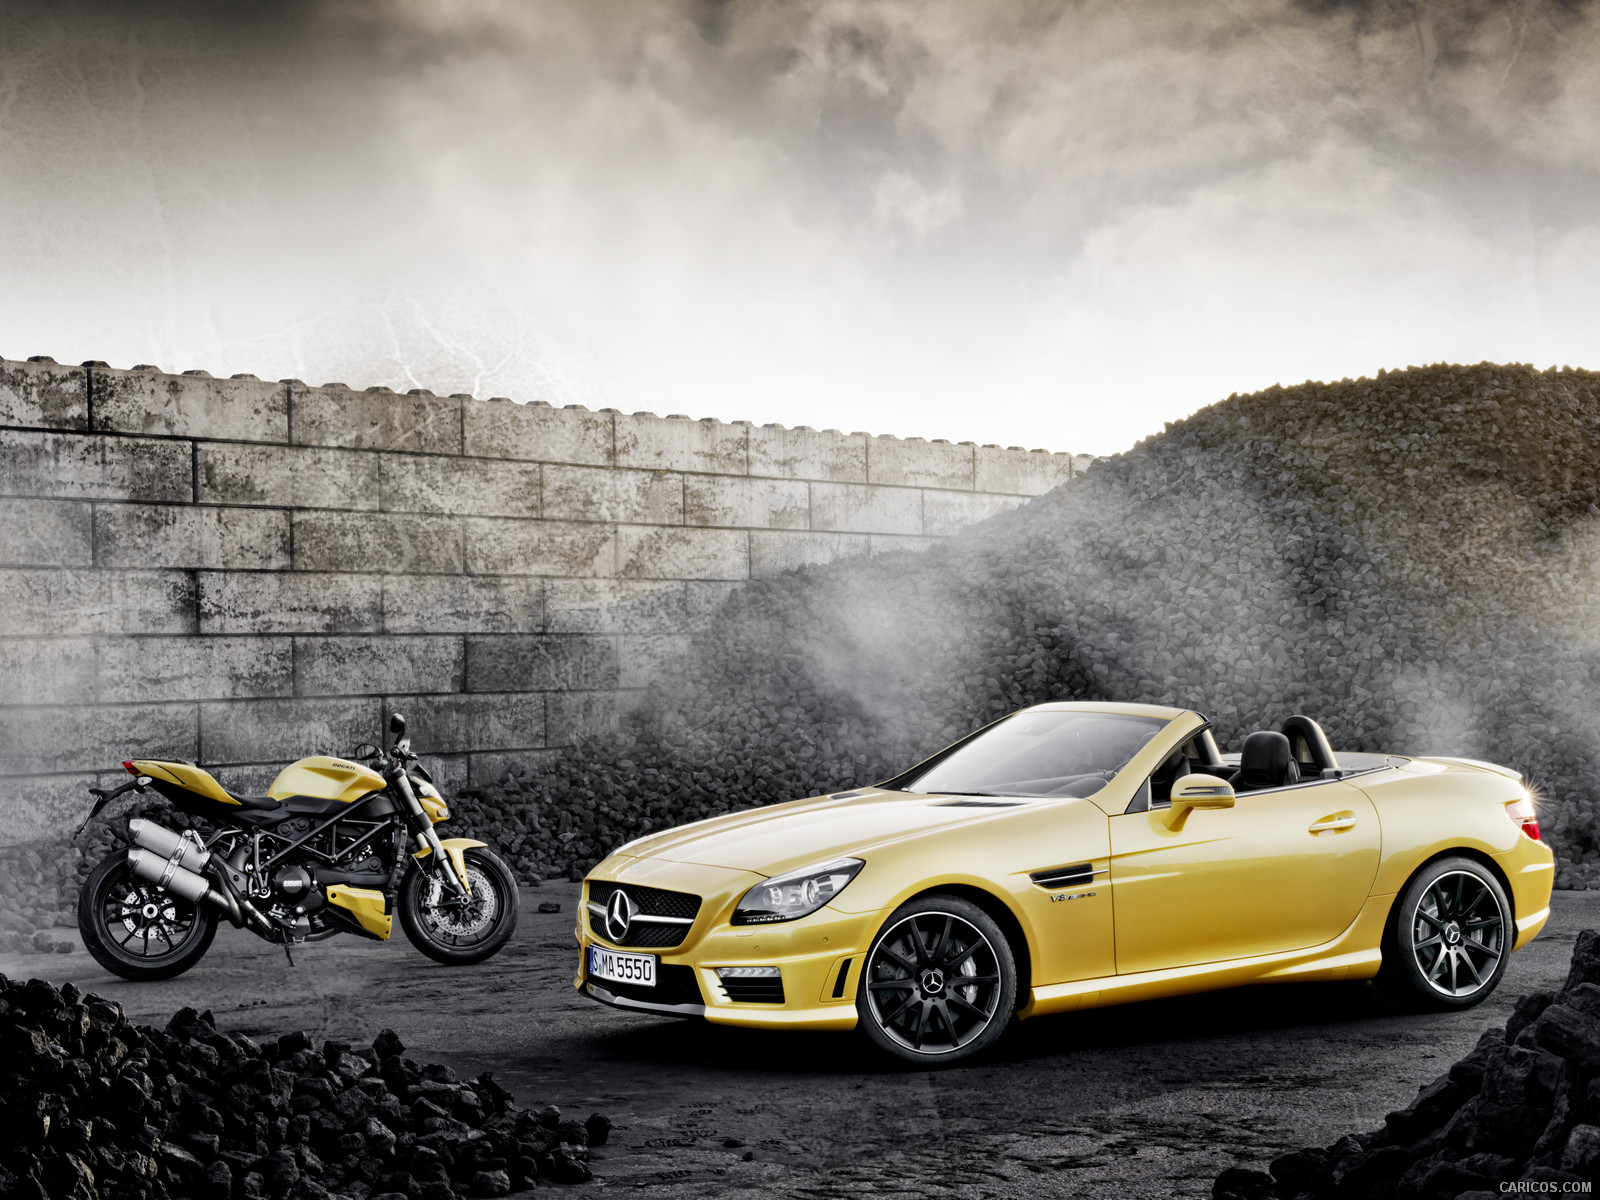 Mercedes-Benz SLK 55 AMG and Ducati Streetfighter 848 - , #46 of 47